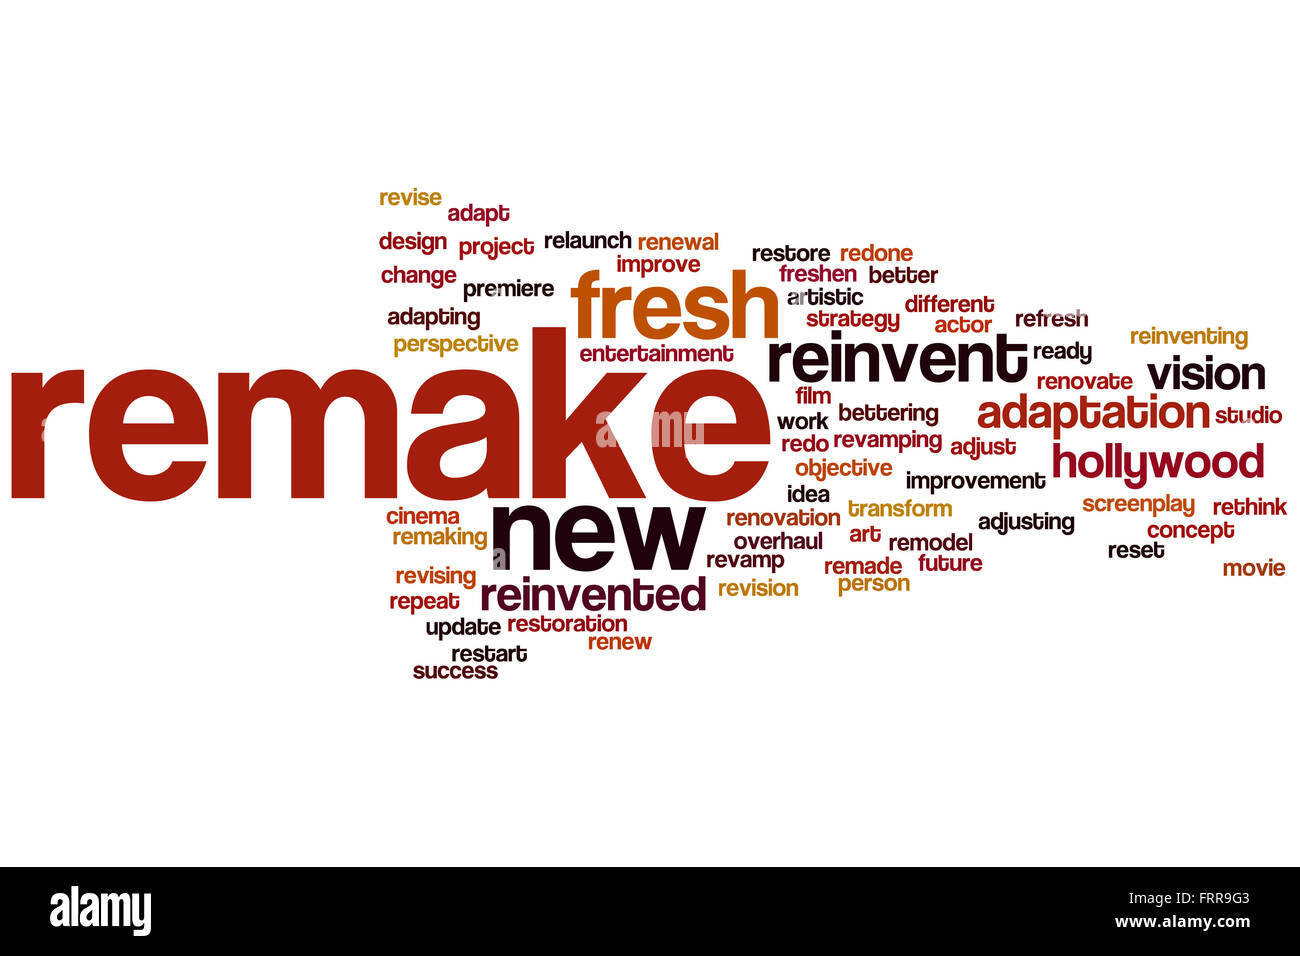 Remake word cloud concept Stock Photo